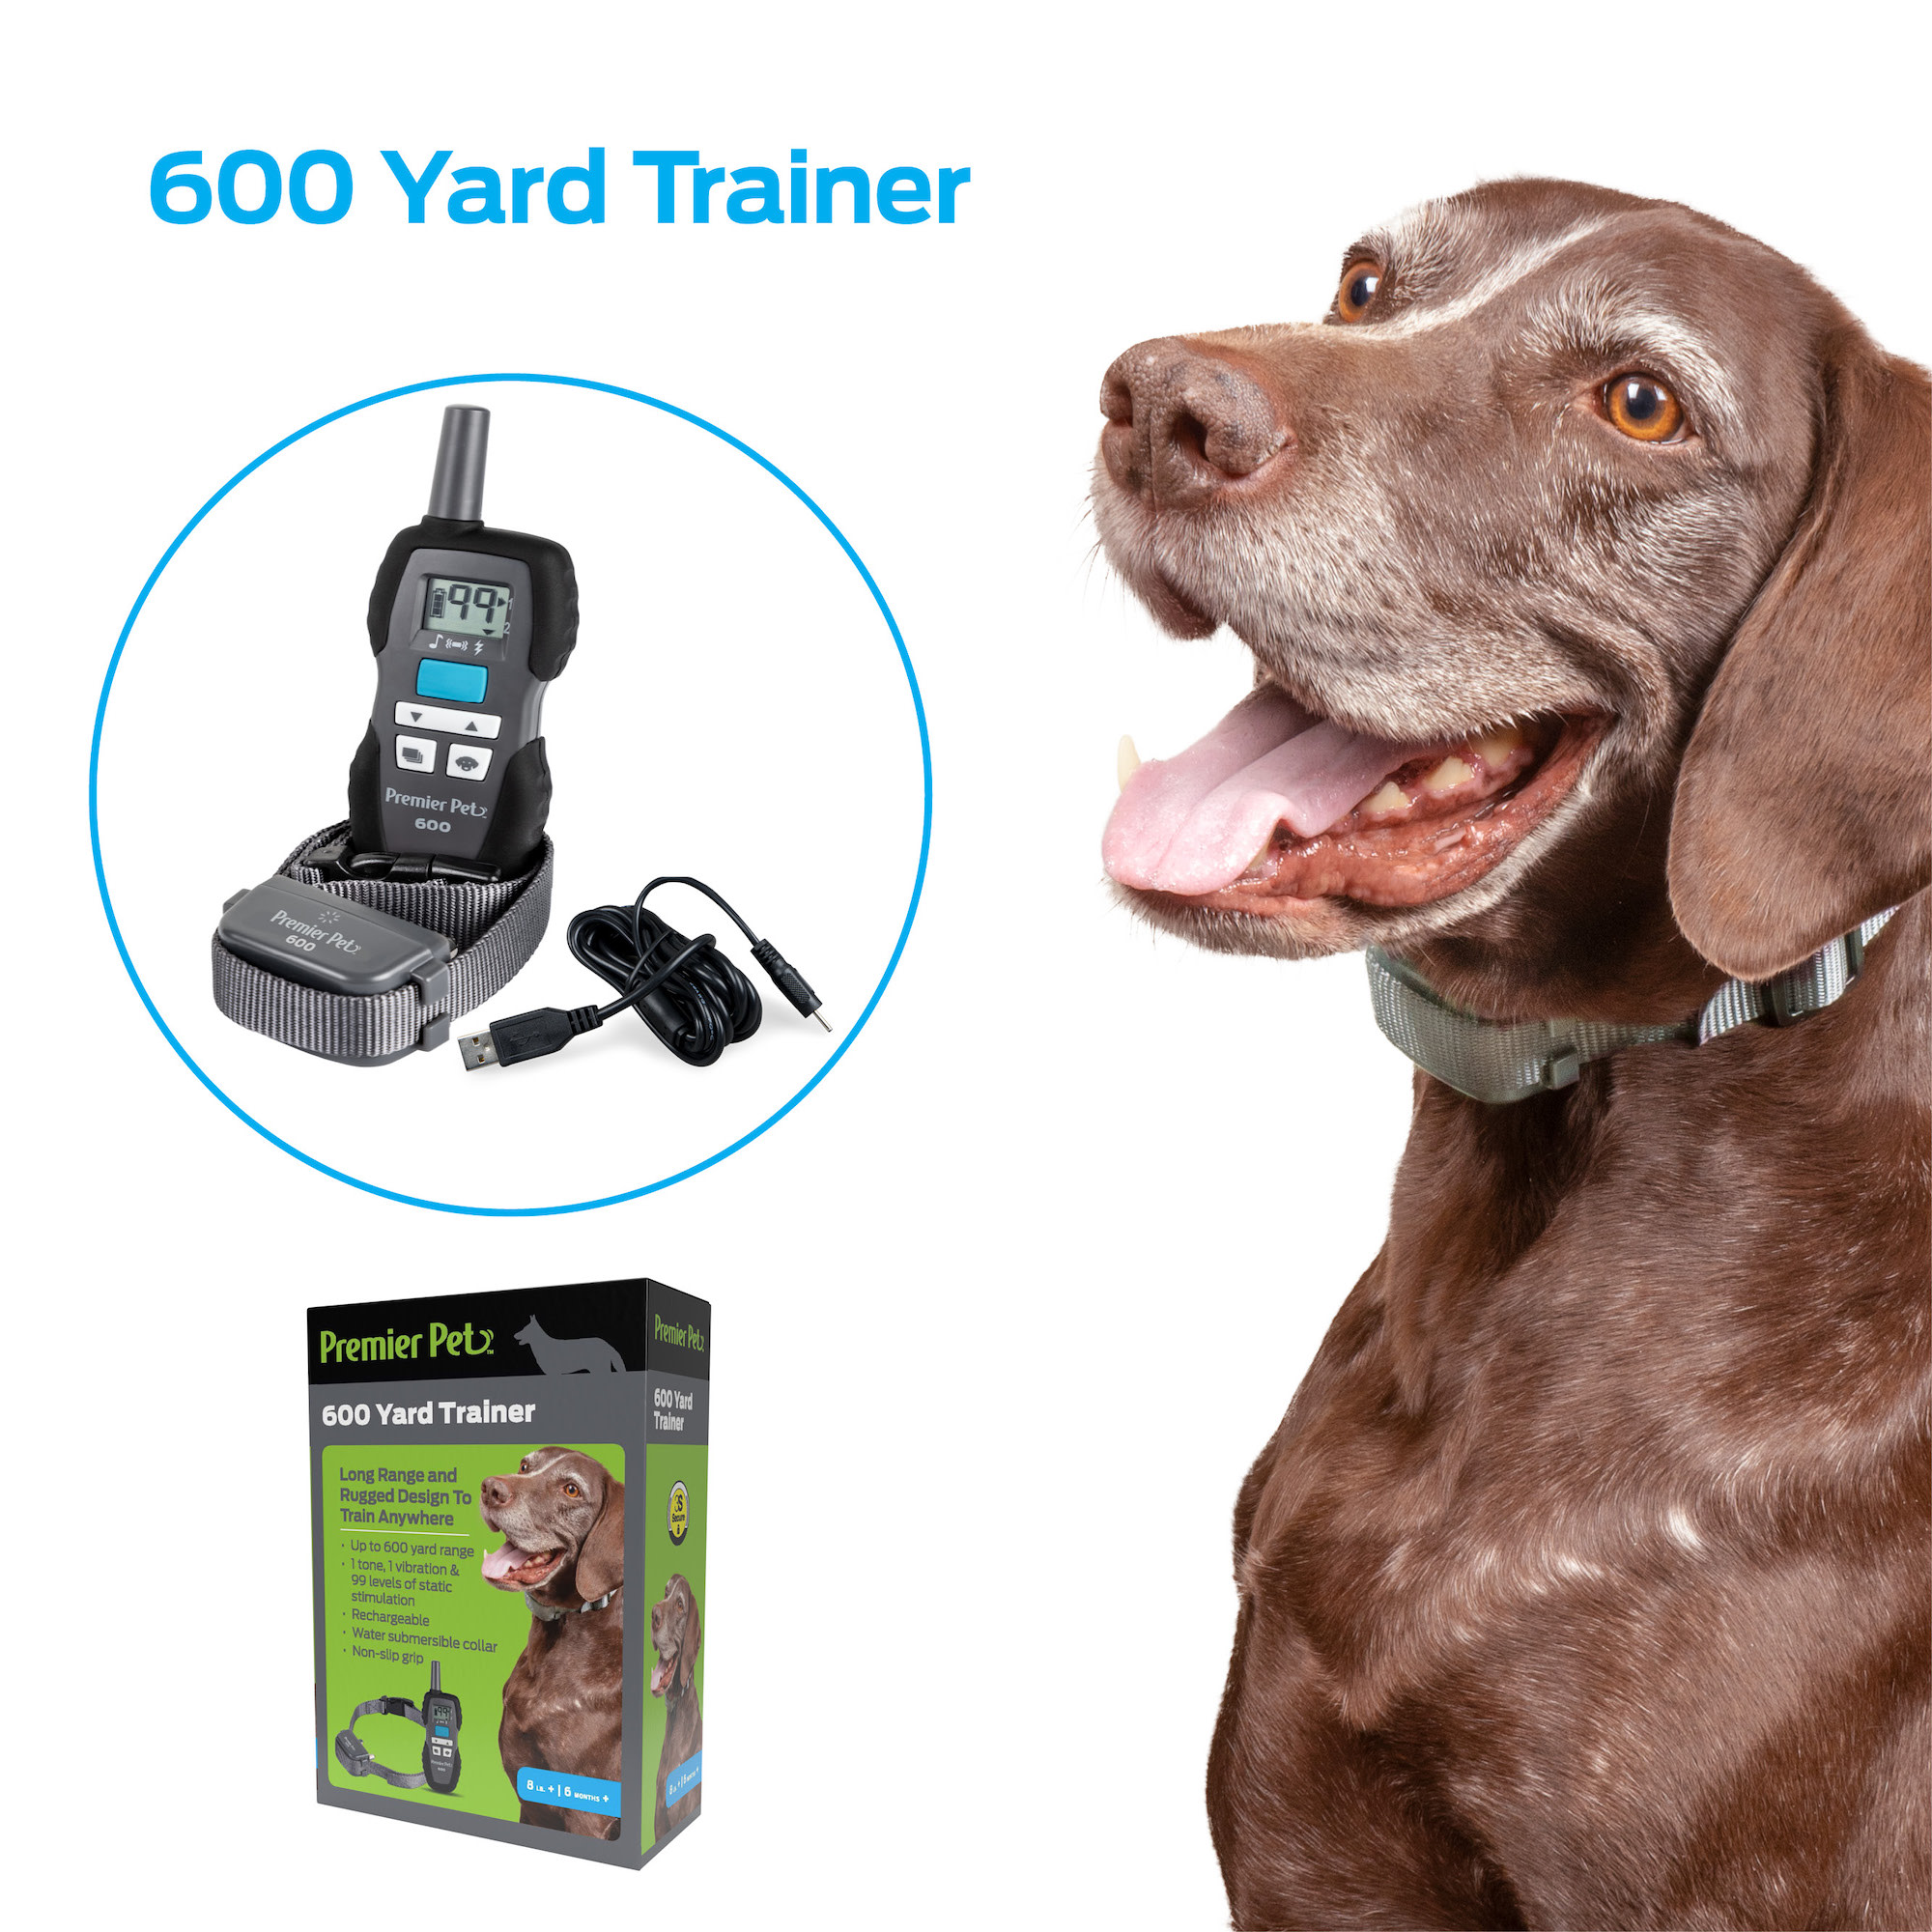 Premier Pet 600 Yard Remote Trainer: Corrects Unwanted Behaviors for All Size Dogs, 3 Correction Modes: Tone, Vibration, & Static, Rechargeable, Durable, Water Submersible, Expandable to 2 Dogs - image 1 of 17